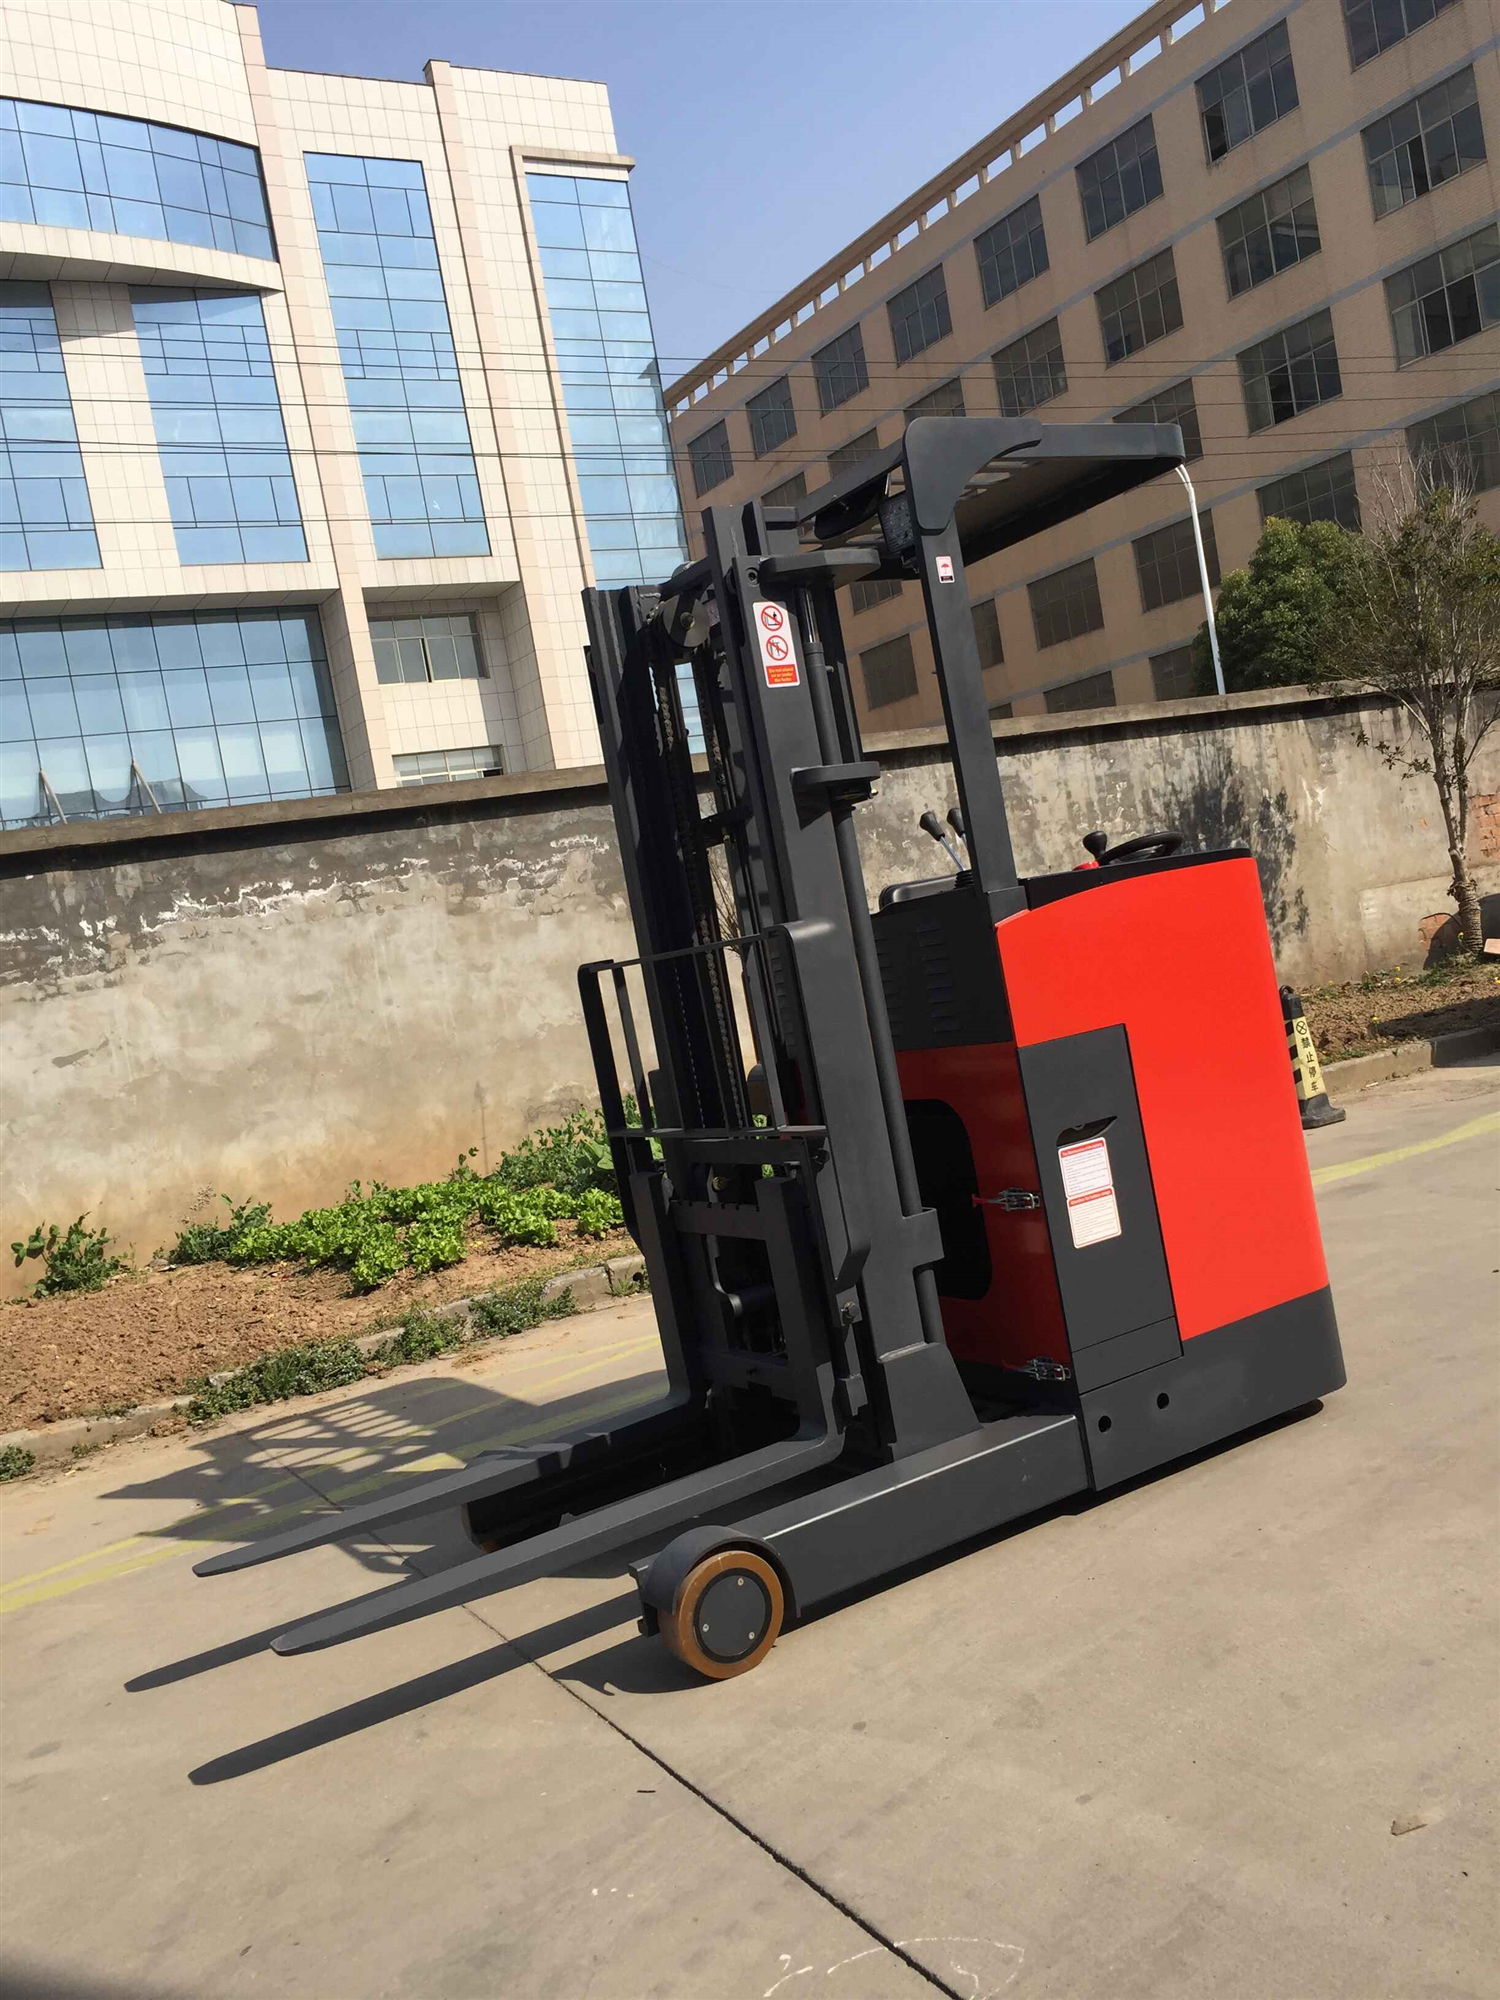 STAND-UP RIDER FORKLIFT CQD-10E